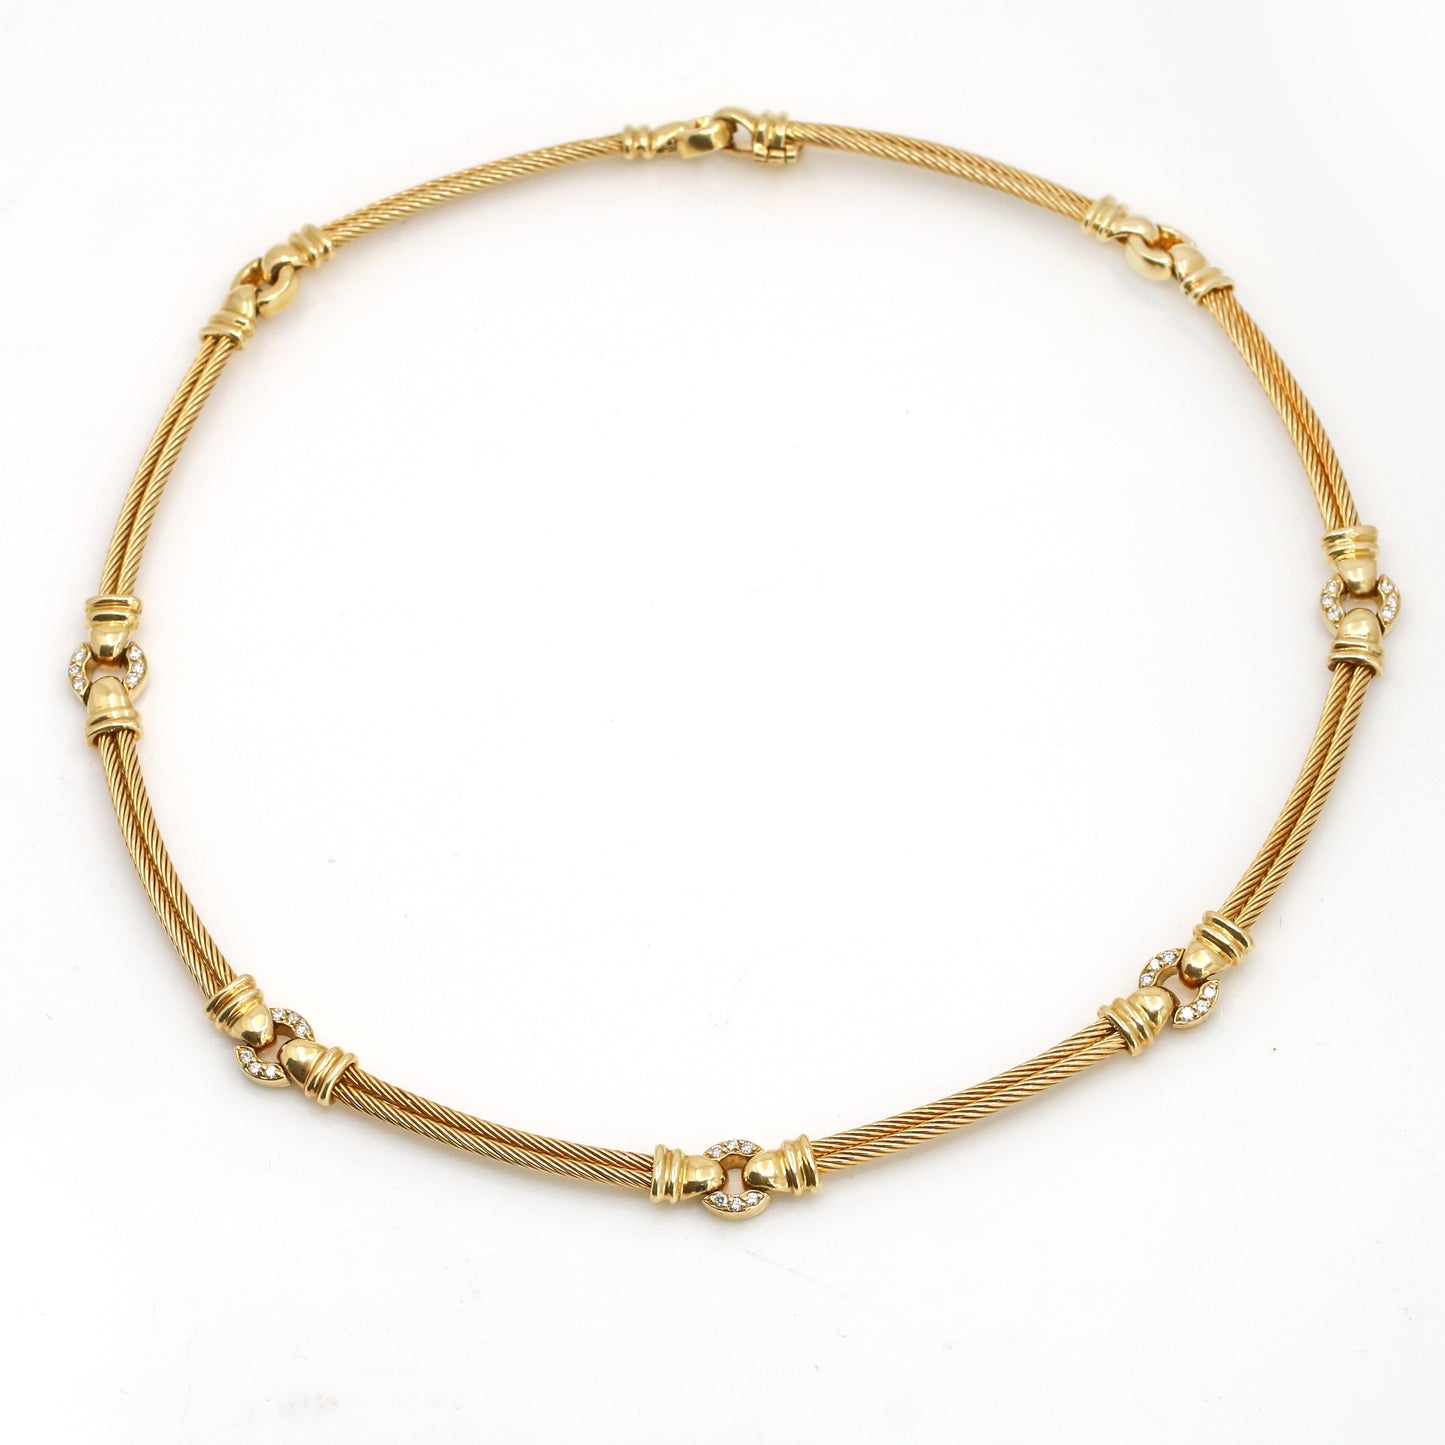 Charriol Diamond Cable Choker Necklace in 18k Yellow Gold